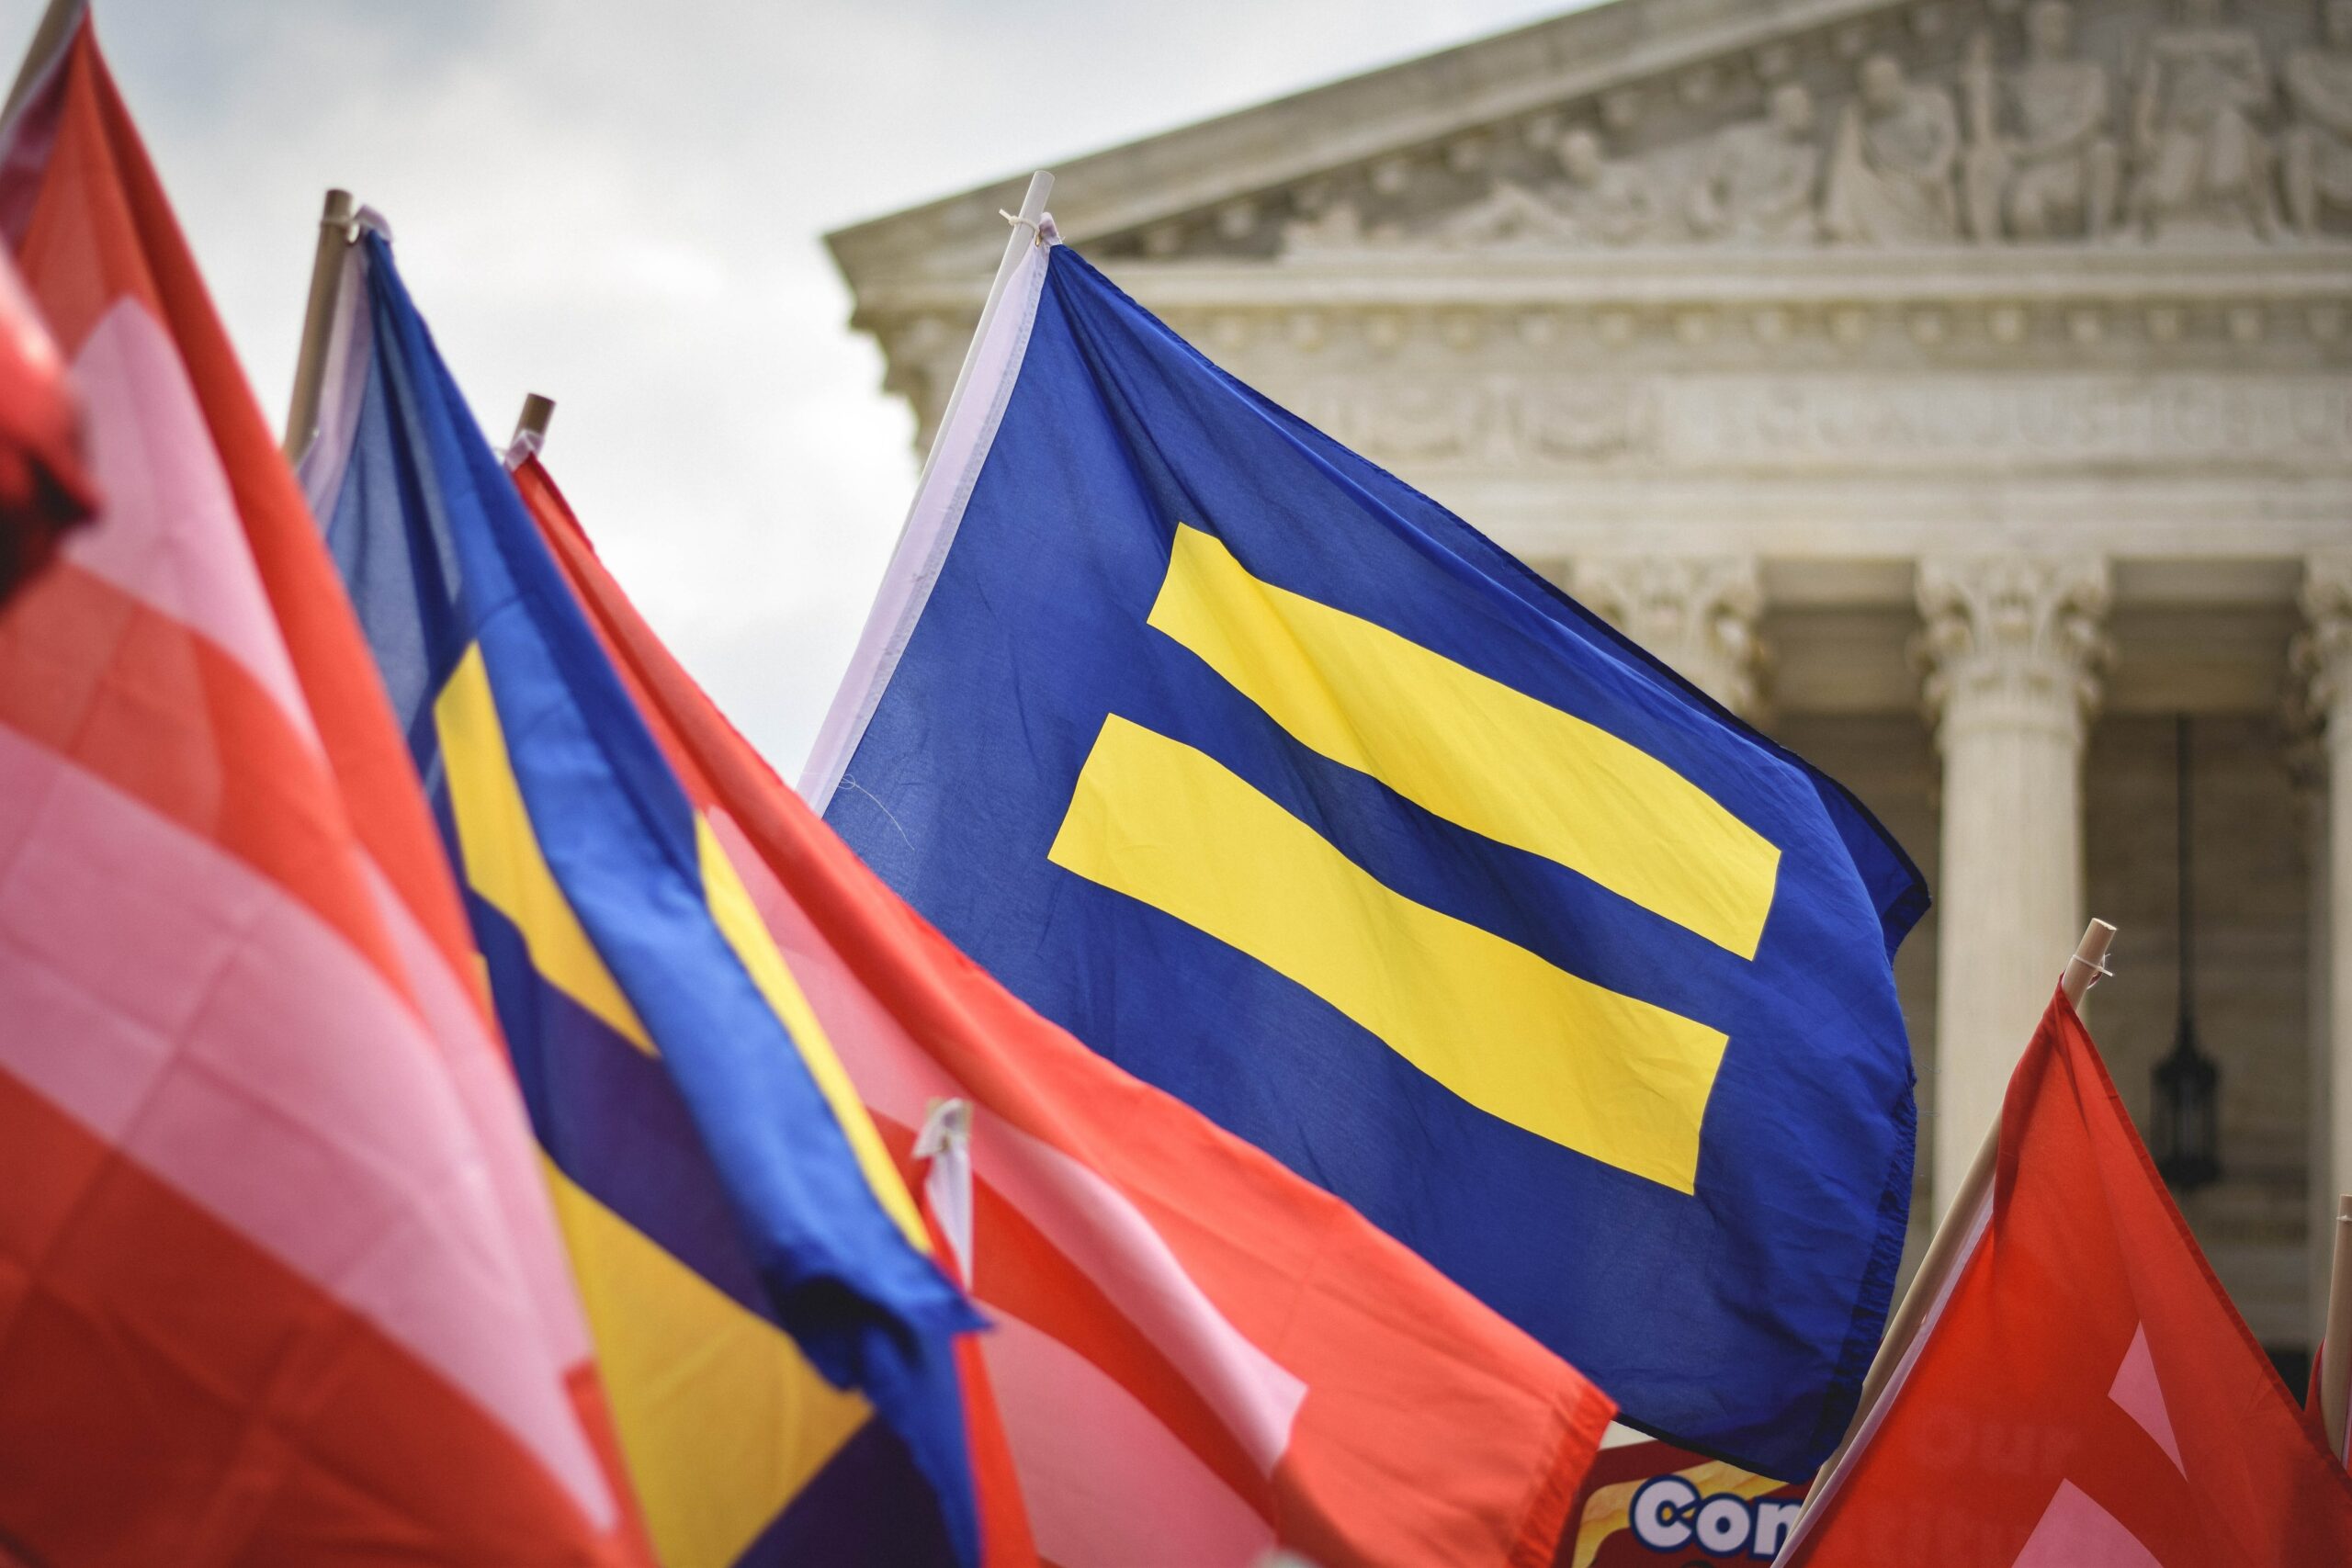 Trans people’s access to health care is imperiled, but a recent Supreme Court case might help